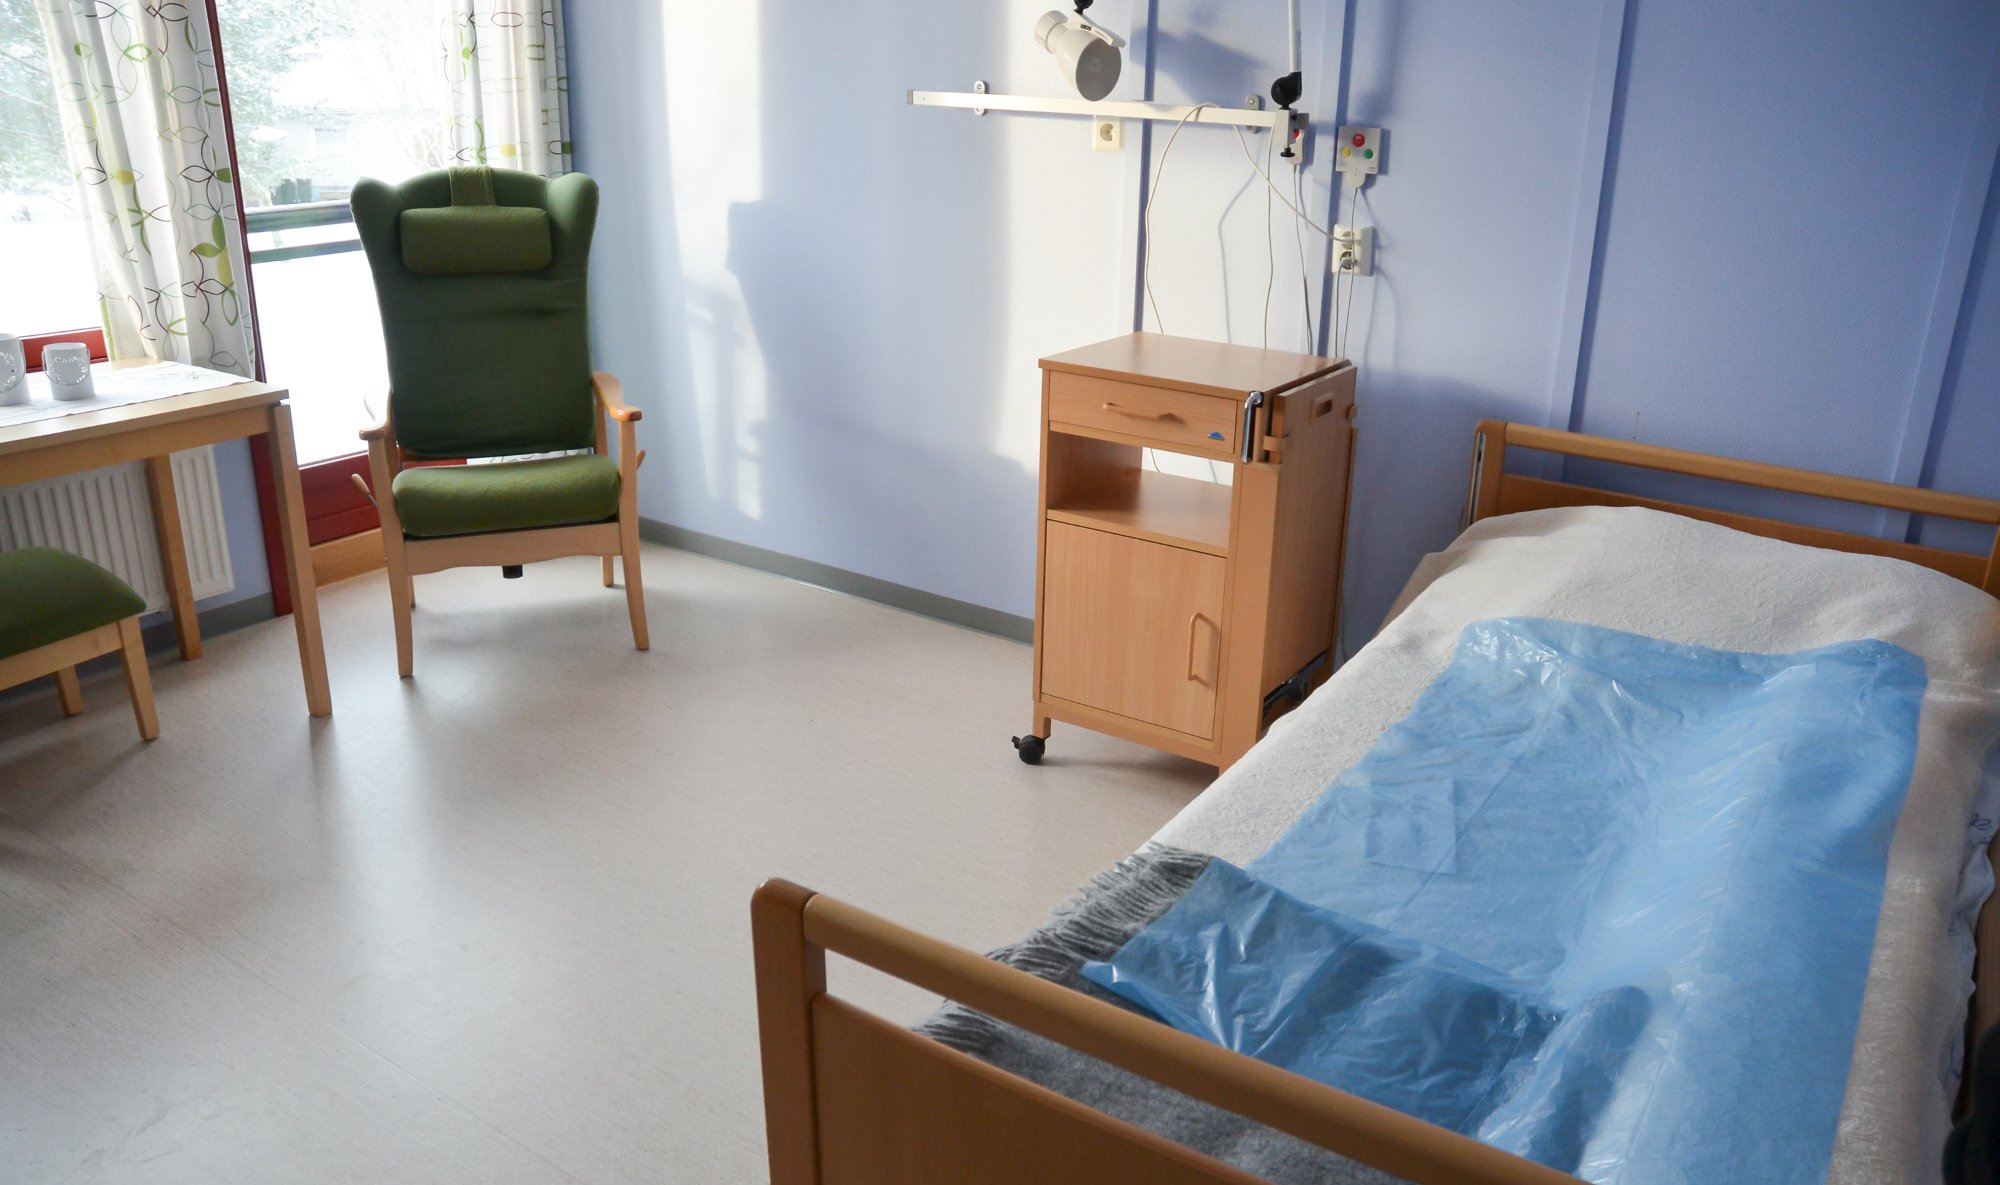 Housing, real estate and health Løten needs more space for dementia patients